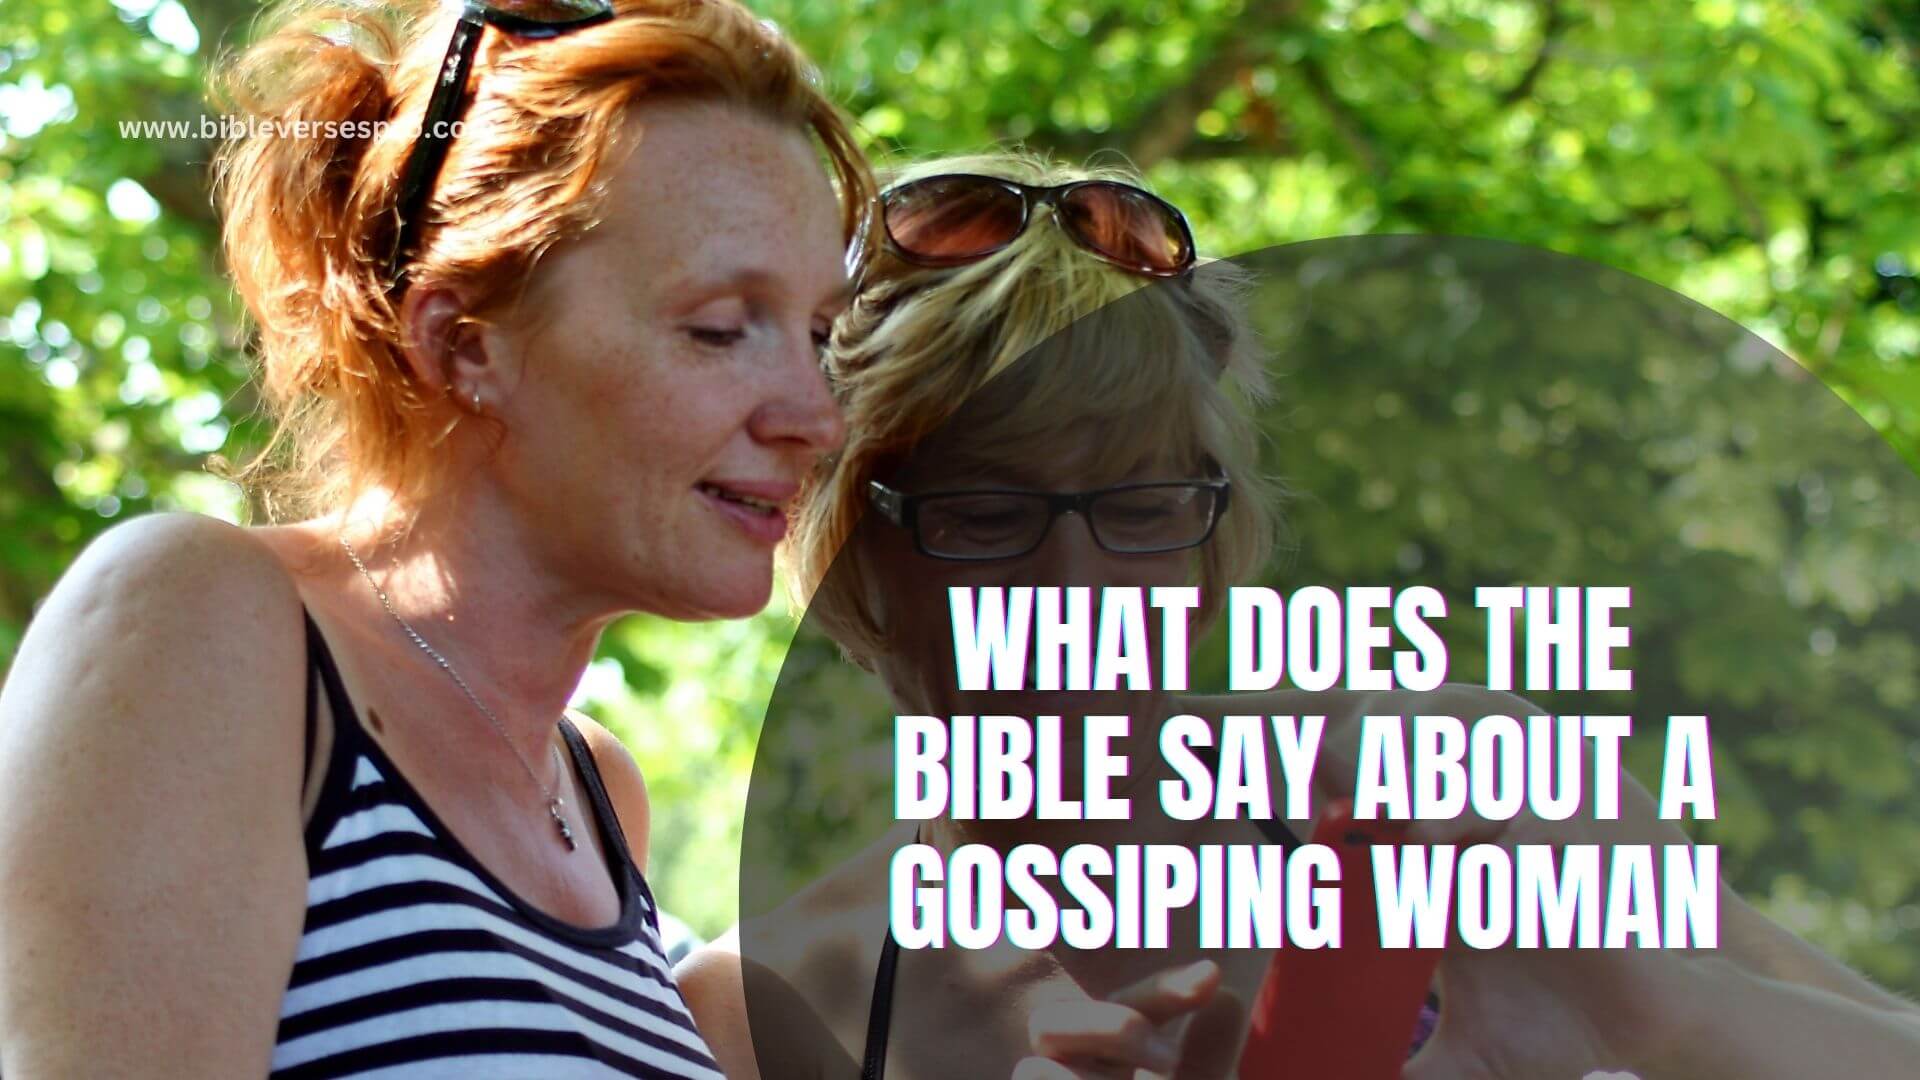 WHAT DOES THE BIBLE SAY ABOUT A GOSSIPING WOMAN (1)